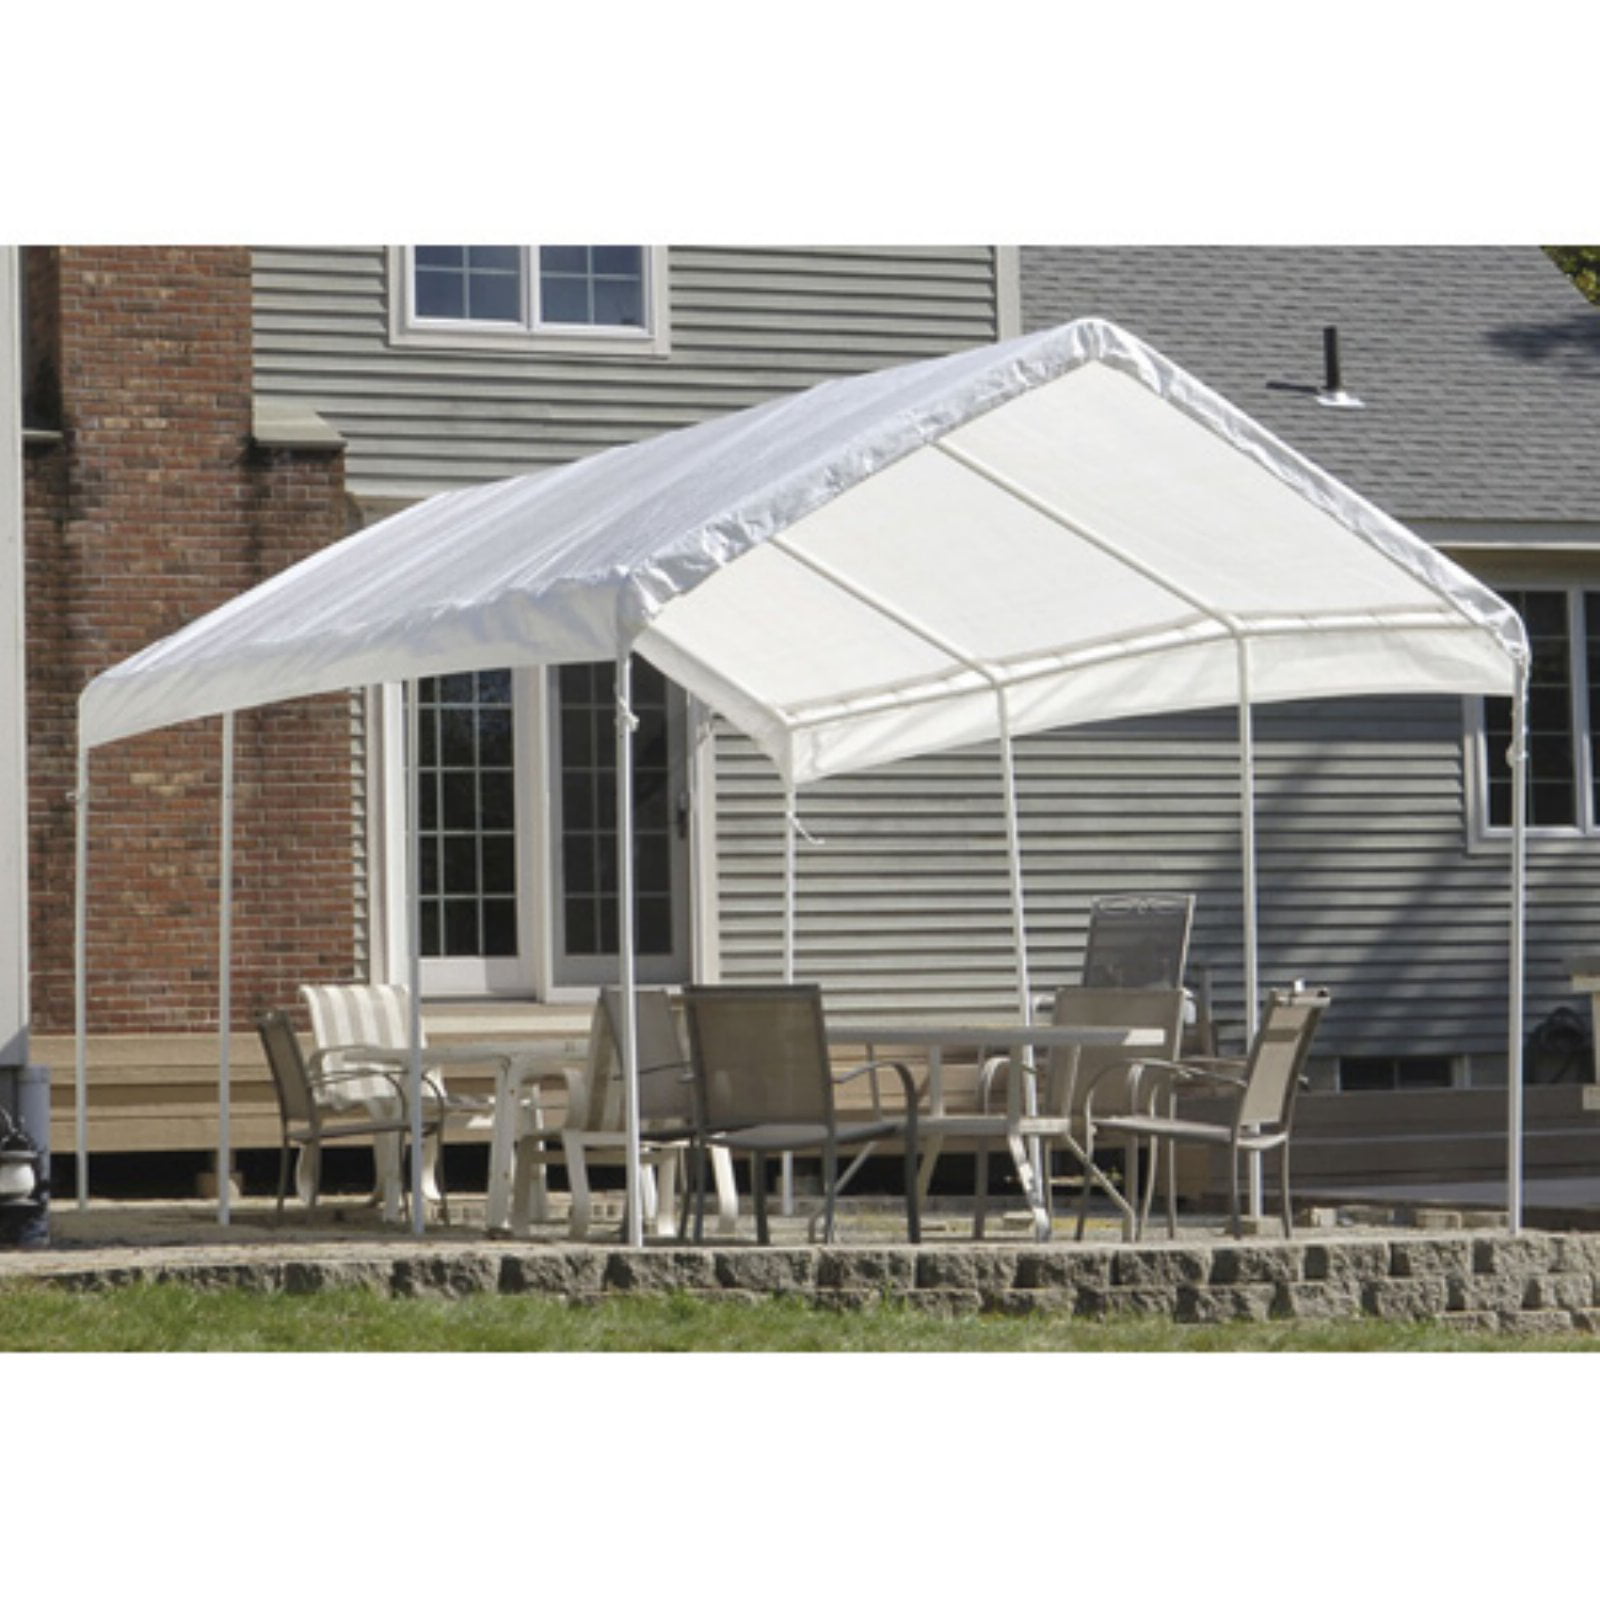 ShelterLogic Max AP Canopy Replacement Top Durable Tarp 10 x 20' White 3 Layers 